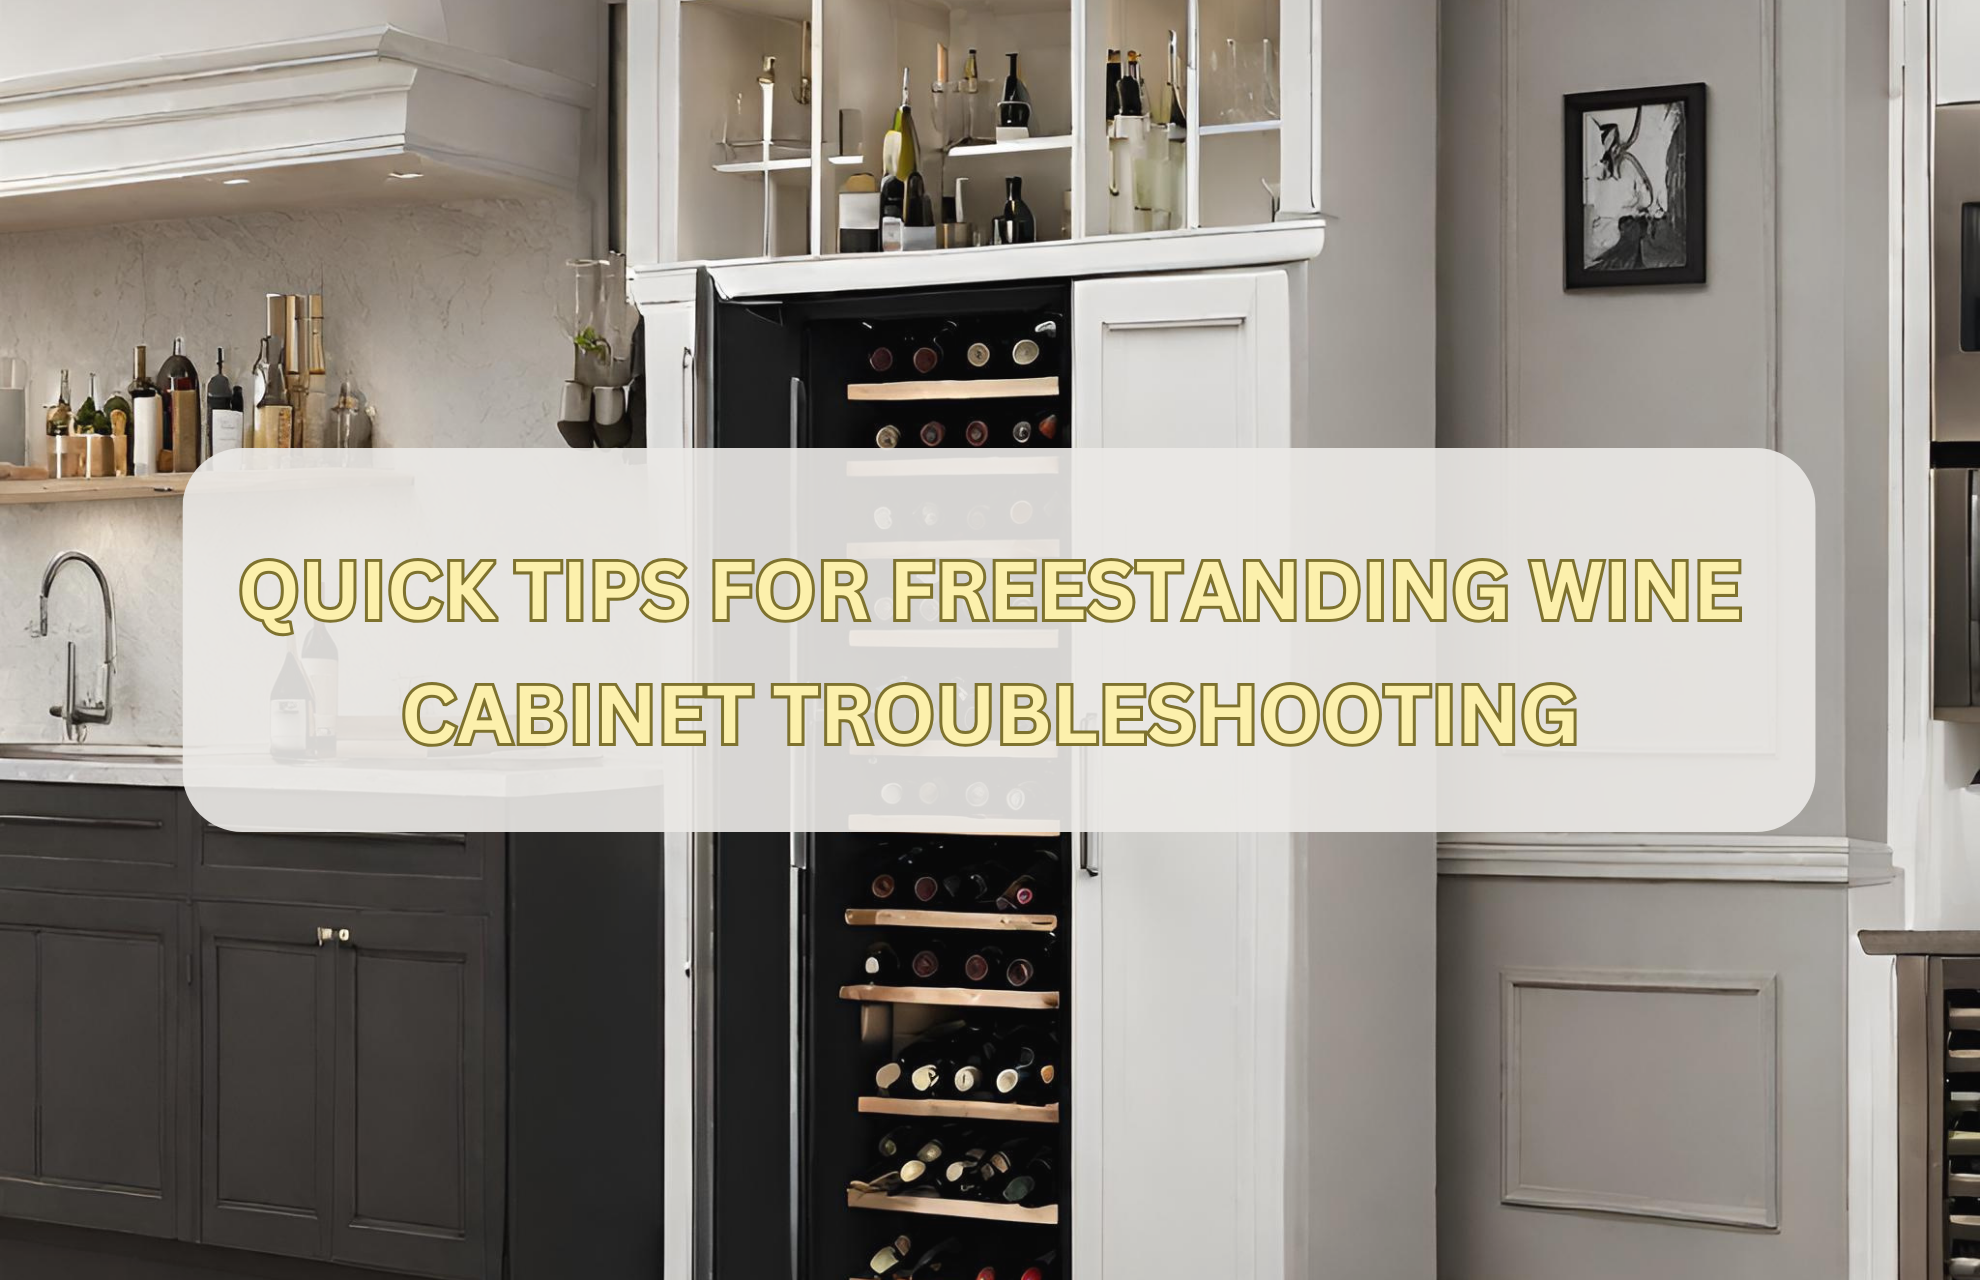 QUICK TIPS FOR FREESTANDING WINE CABINET TROUBLESHOOTING